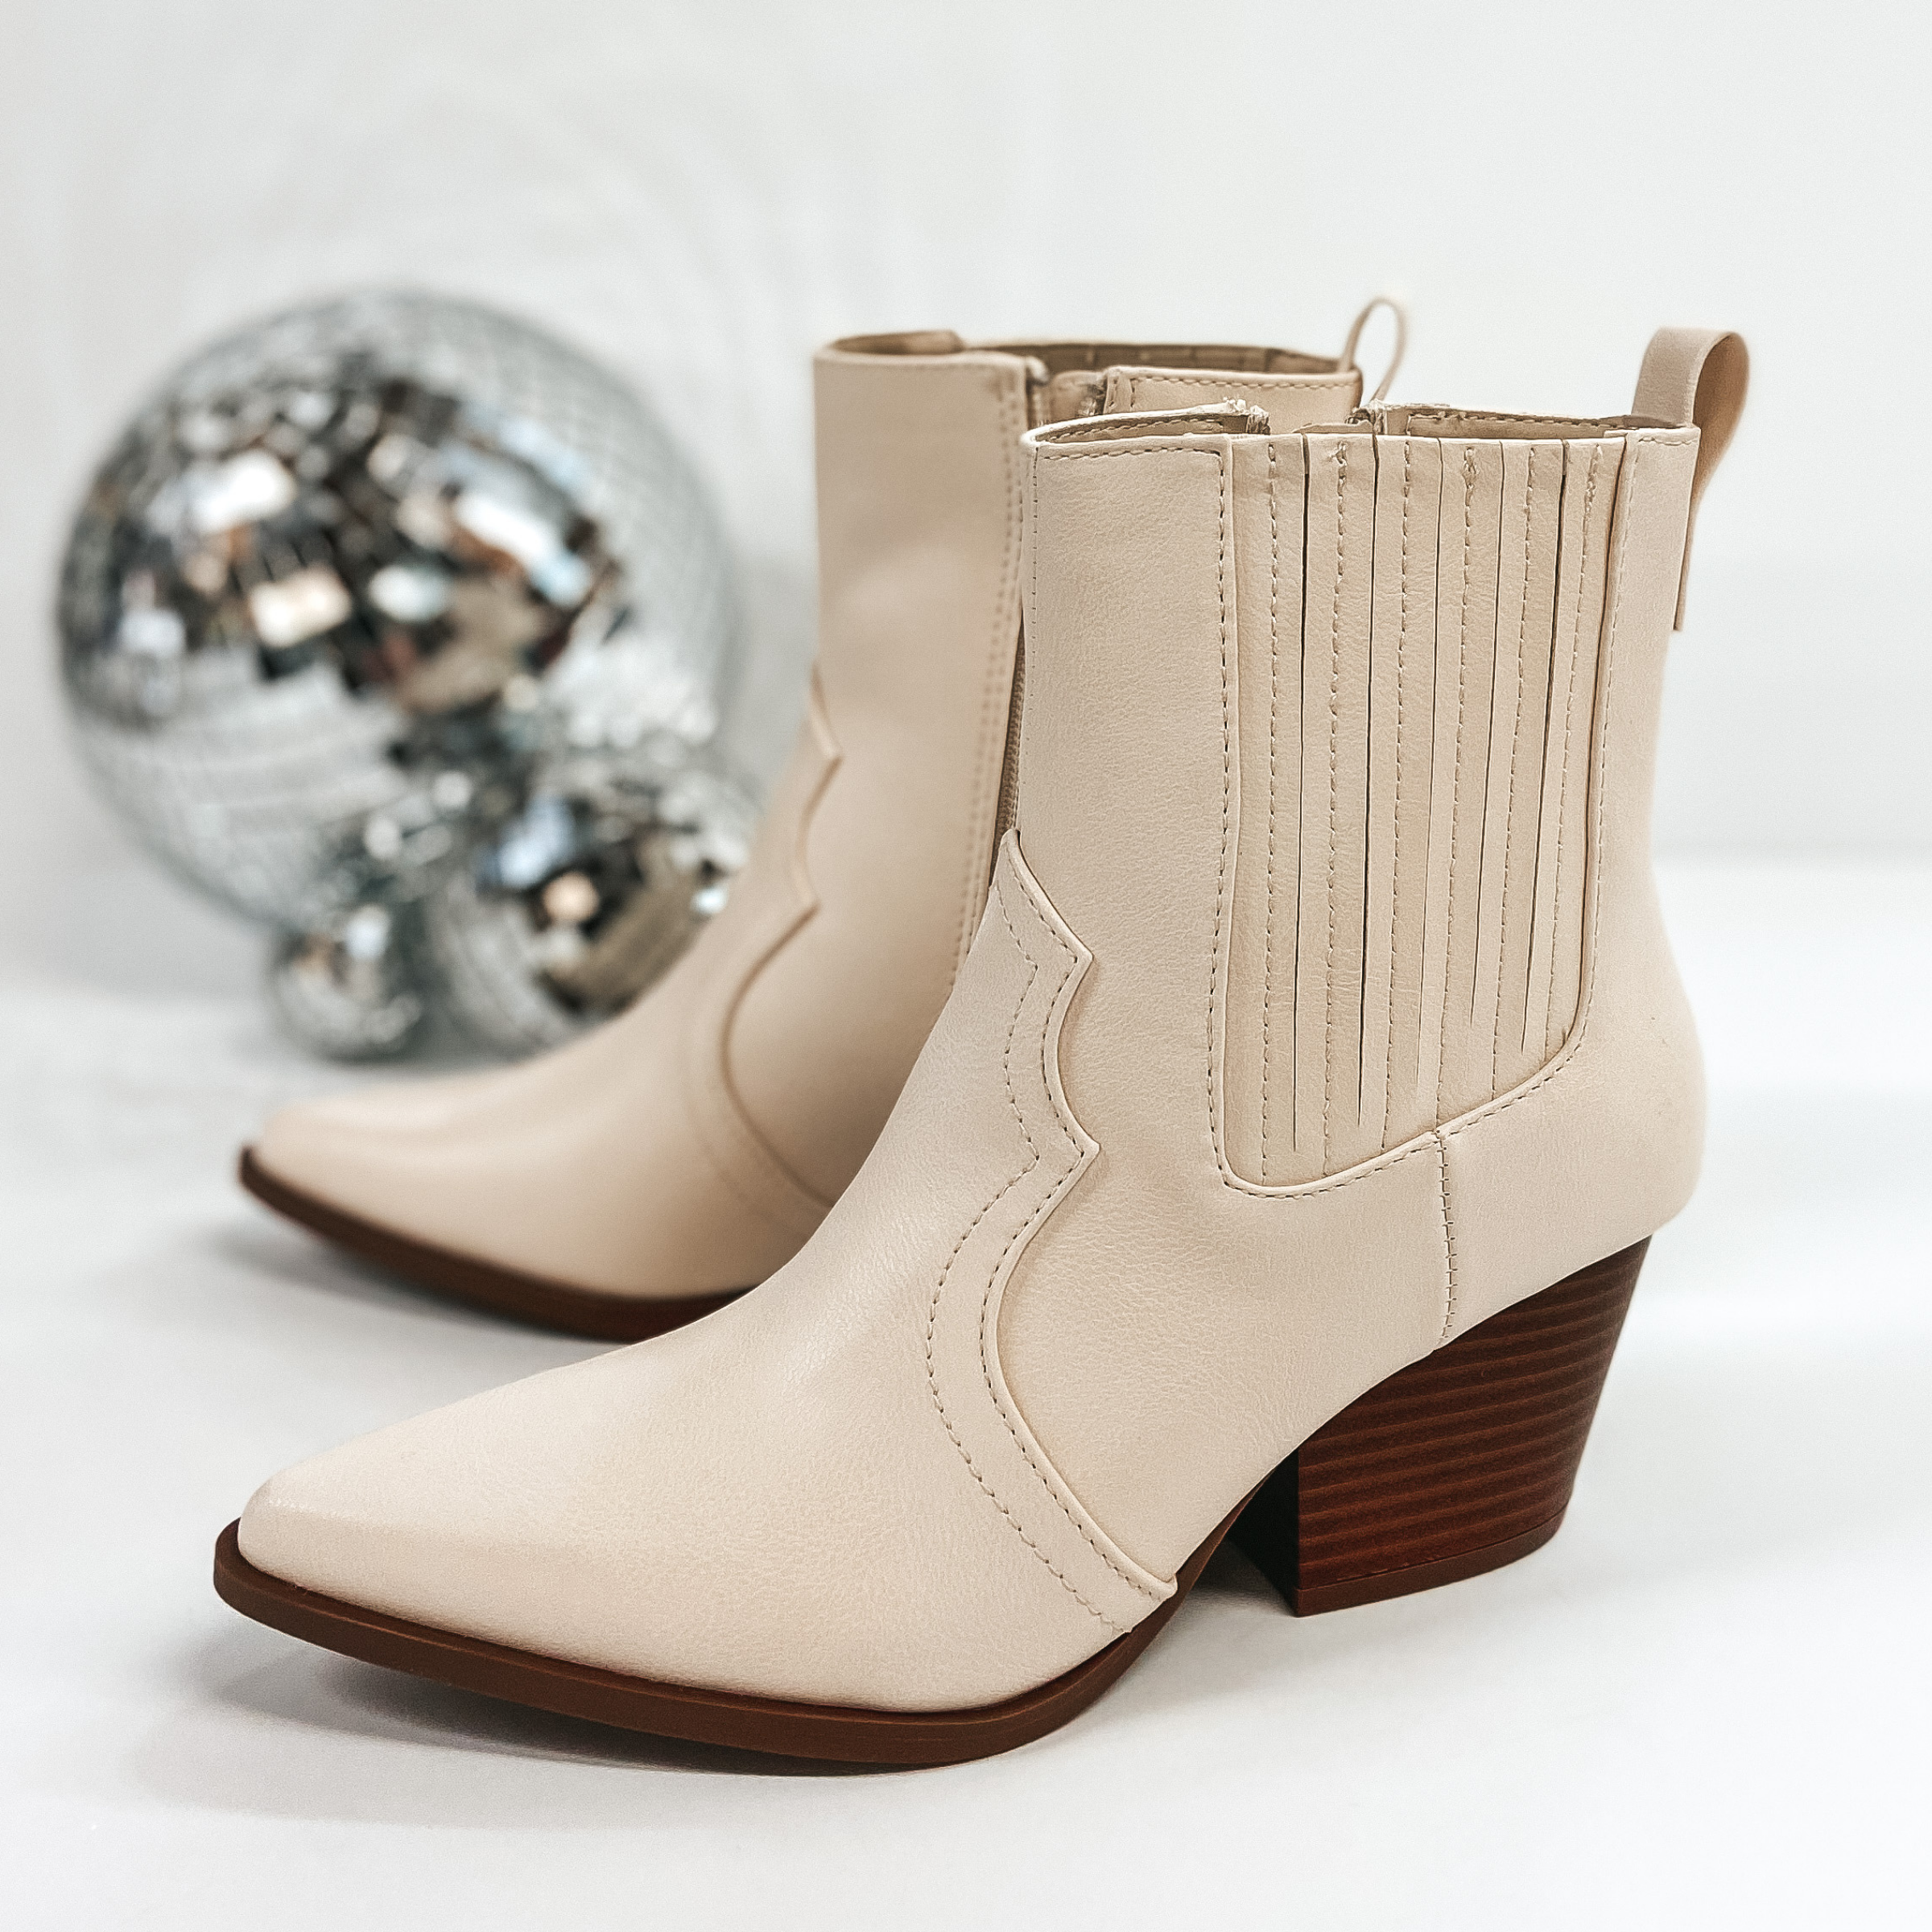 Western style short booties that are ivory. These shoes have a brown sole and heel. Pictured on white background with disco balls.